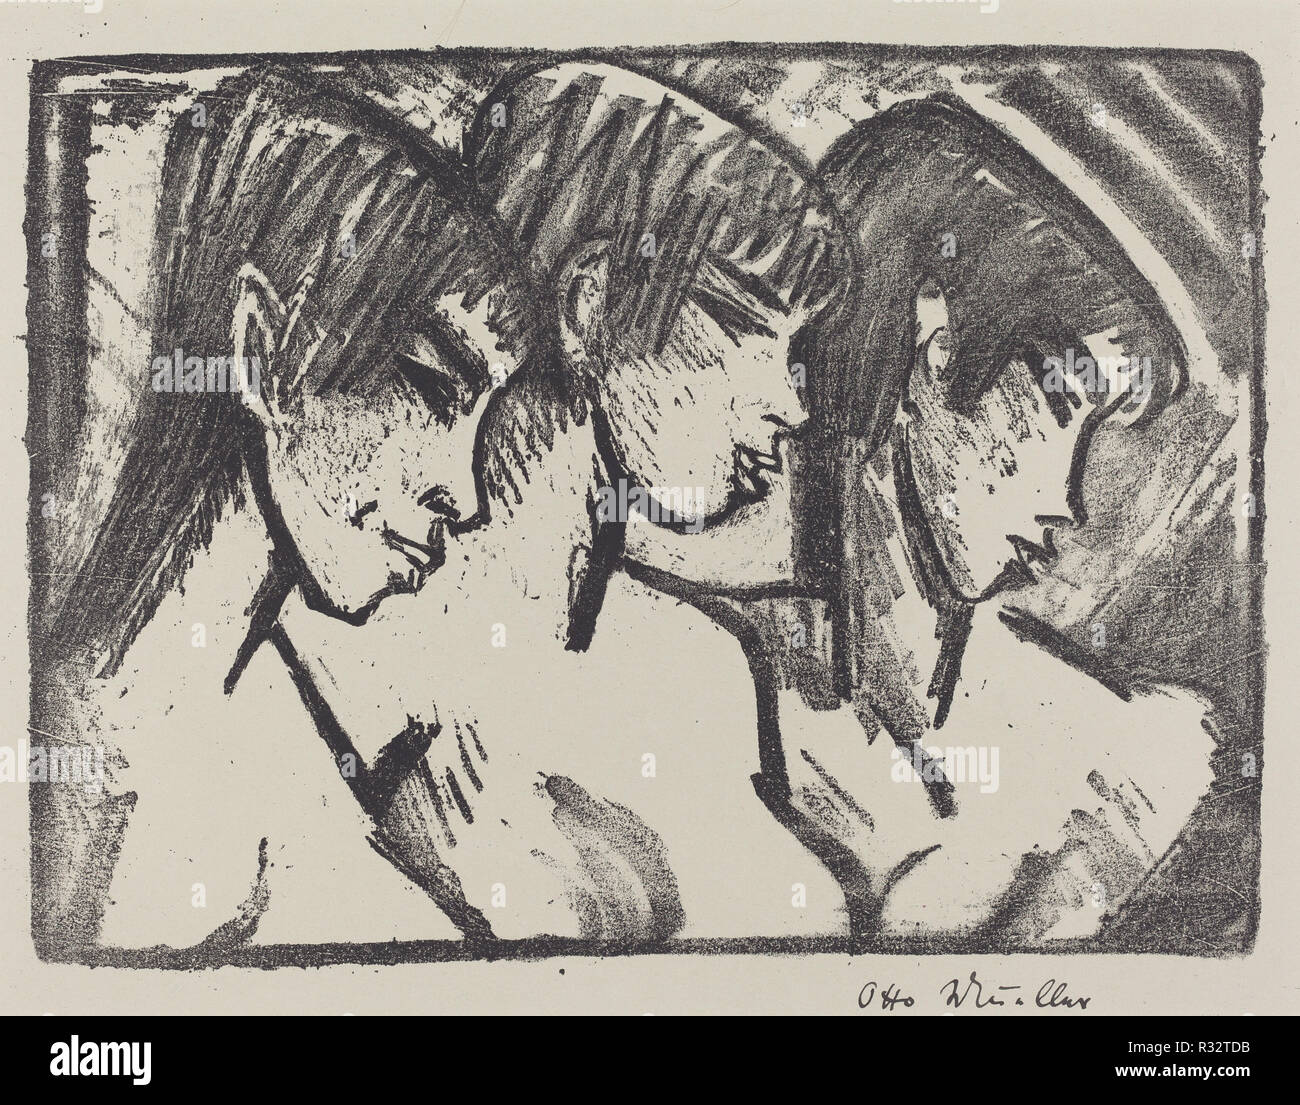 Three Girls in Profile (Drei Madchen im Profile). Dated: 1921. Medium: lithograph. Museum: National Gallery of Art, Washington DC. Author: Otto Müller. Stock Photo